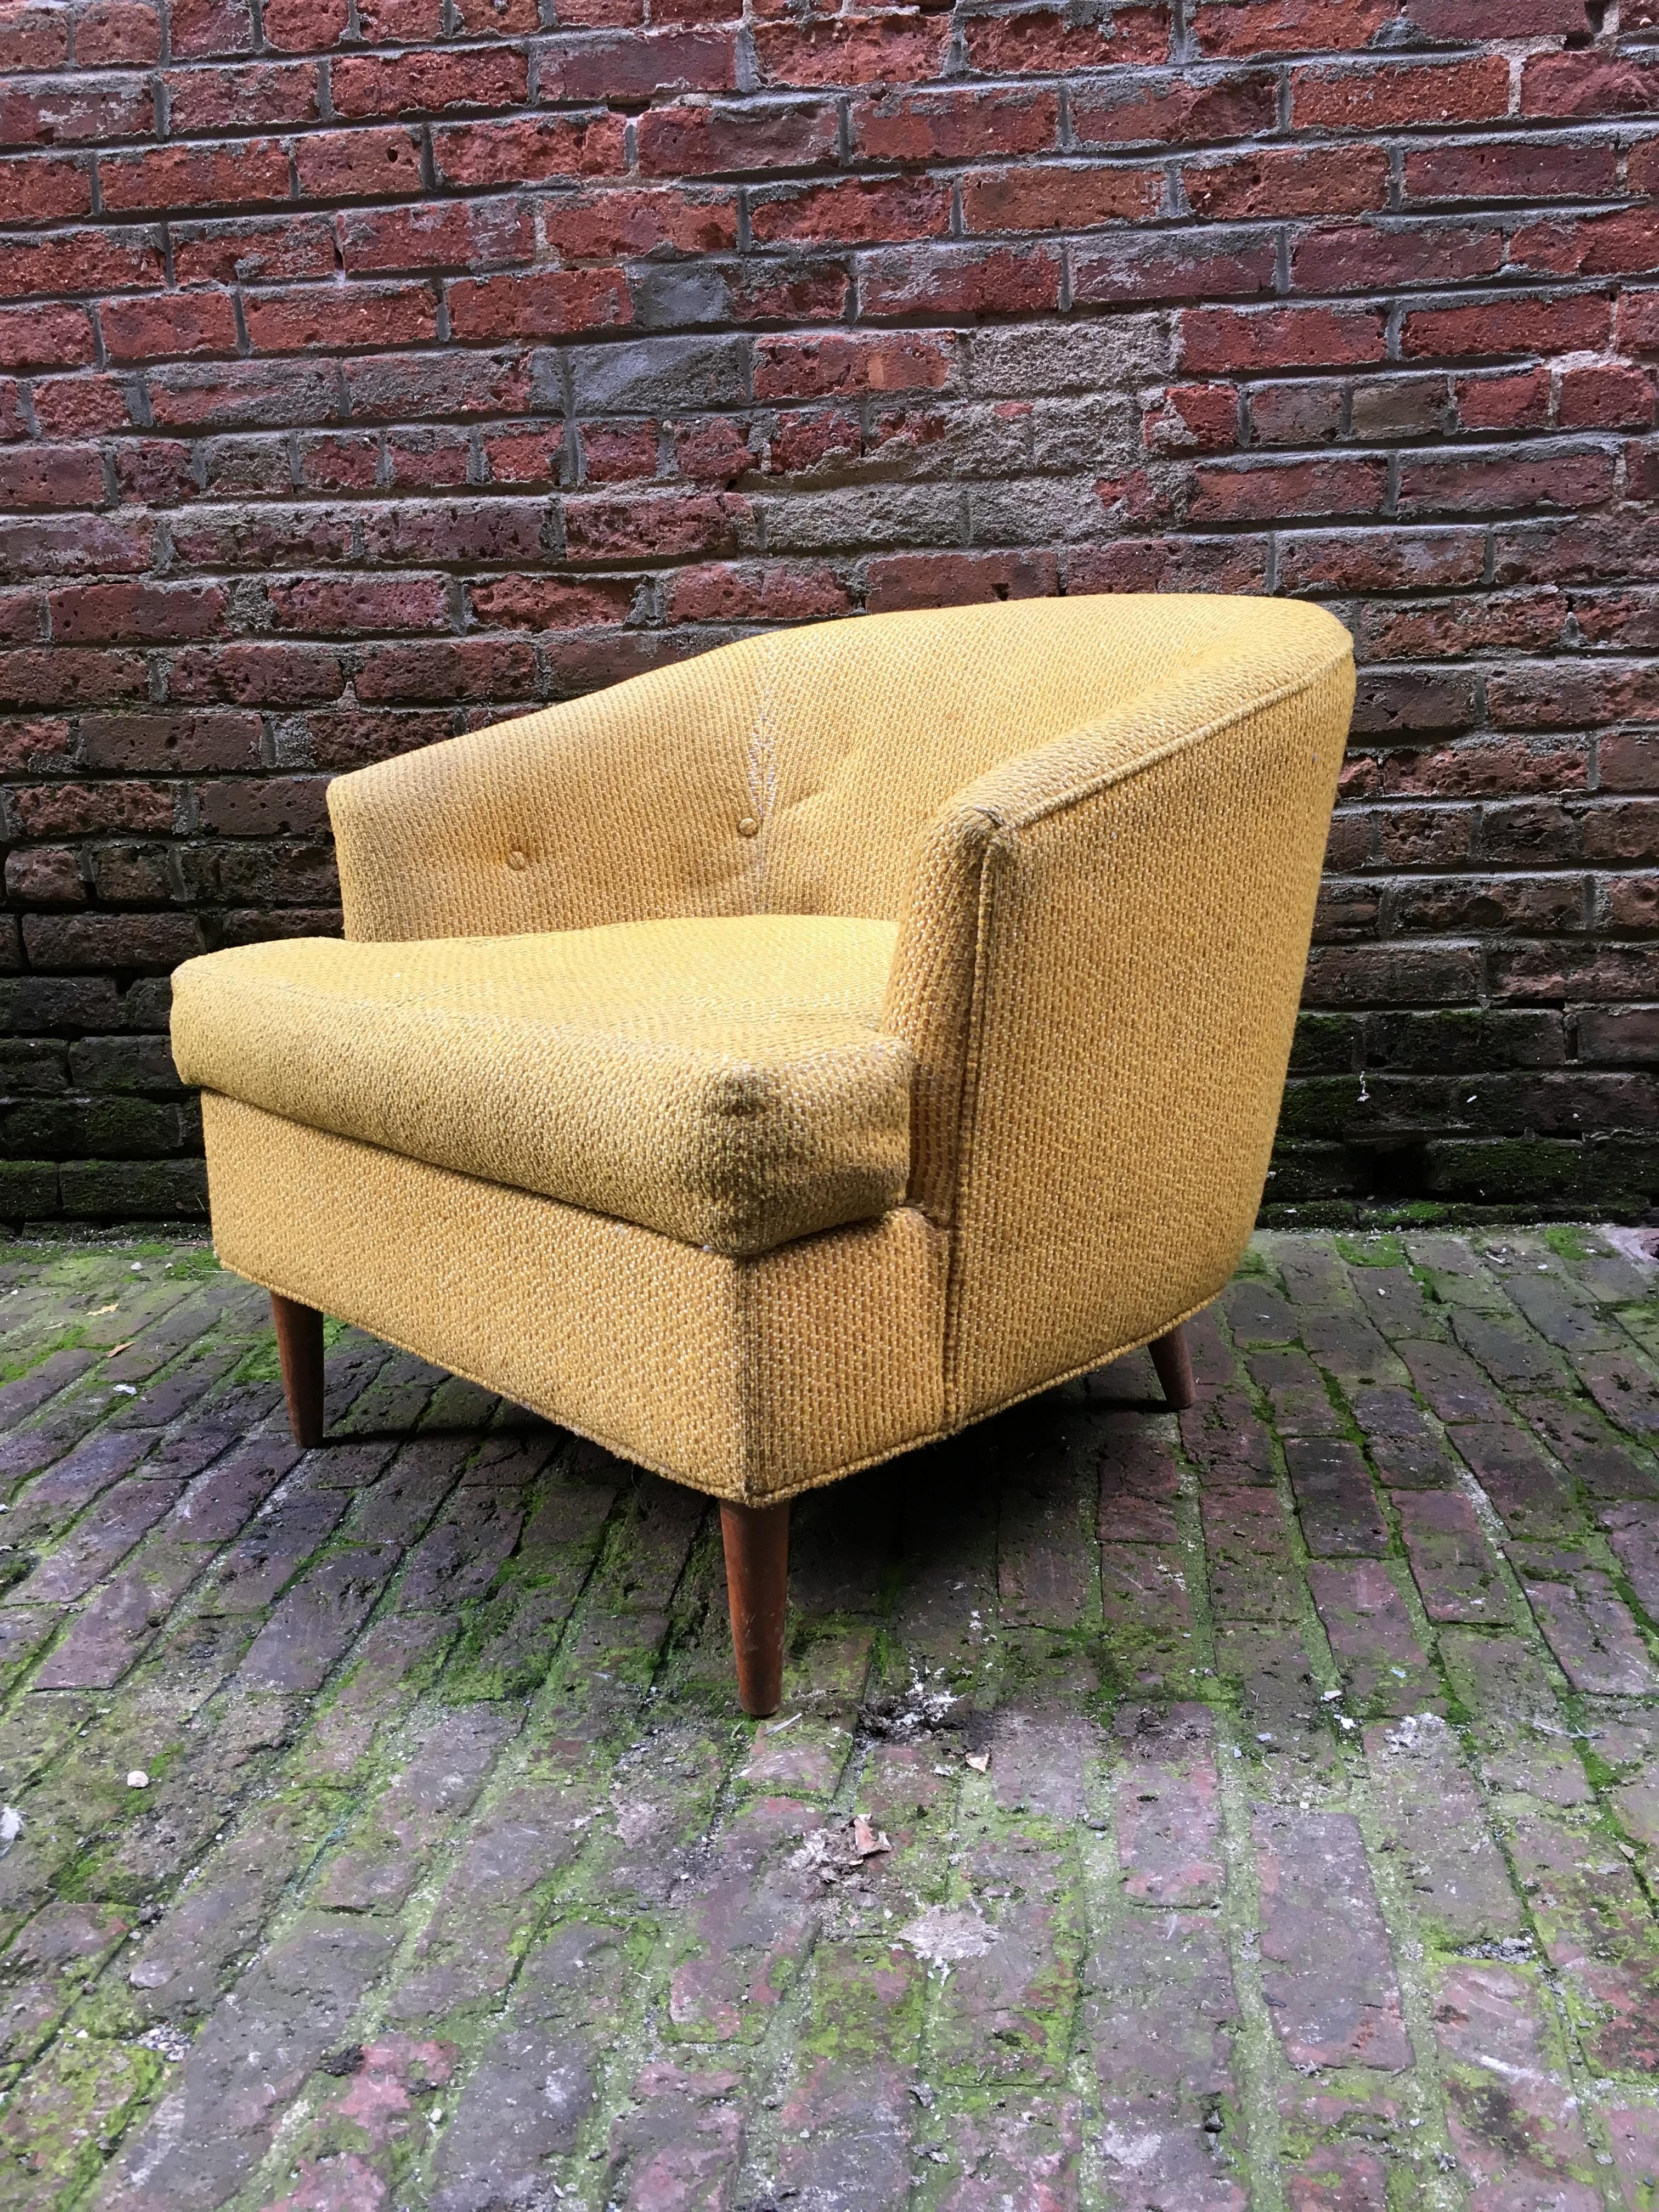 Retailed or imported by Selig, circa 1960-1970. Diminutive barrel back lounge chair, which is probably of Scandinavian origin. Upholstered on four tapered legs. Original yellow and white upholstery. 

Measures: 30